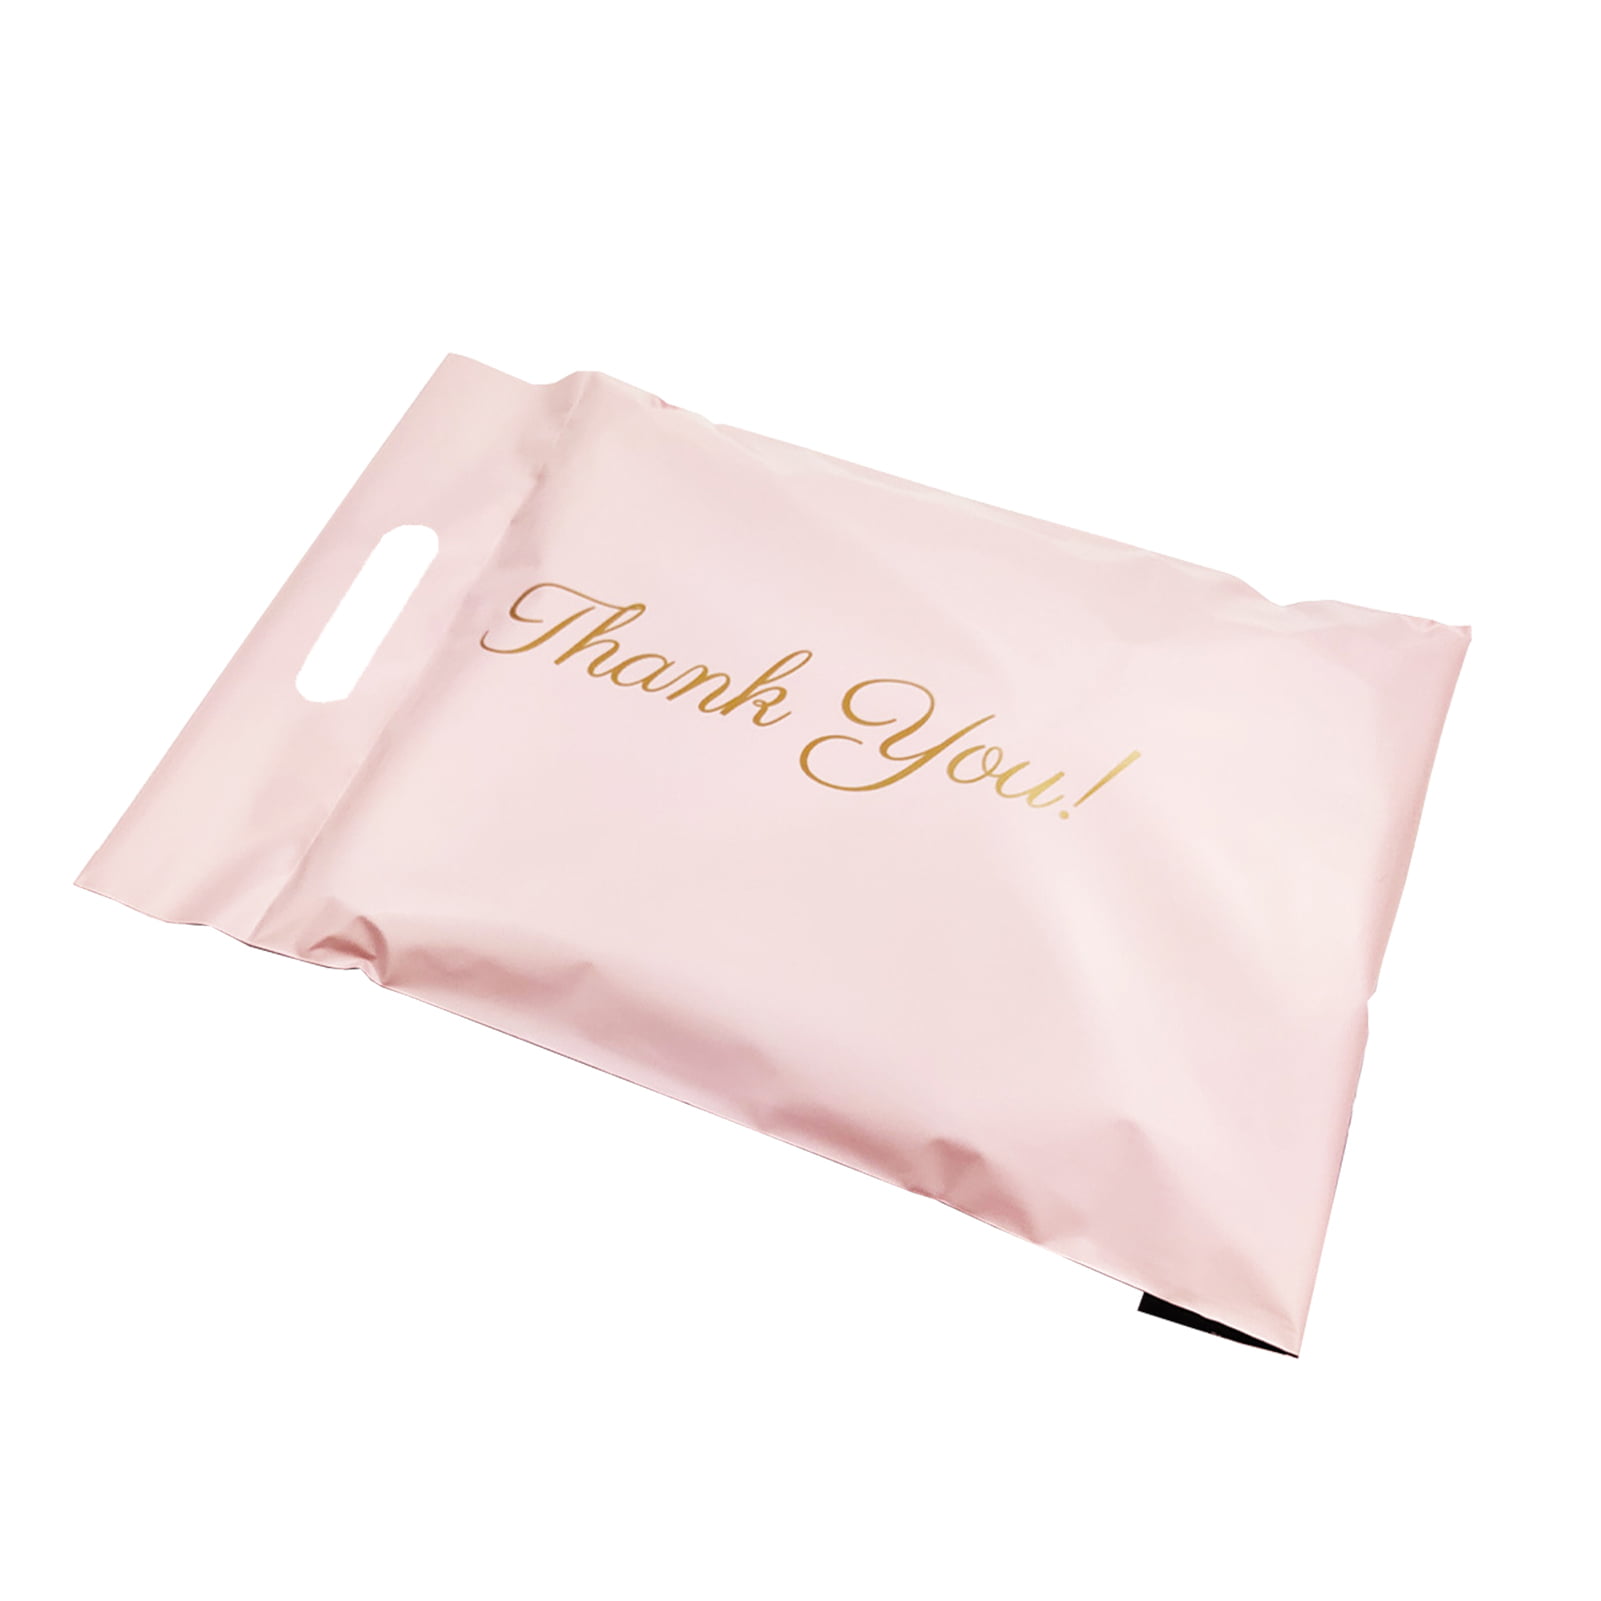 200 FUNKY PINK Mailing Postage Parcel Post Bags 6.5 x 9" Self Seal Packaging